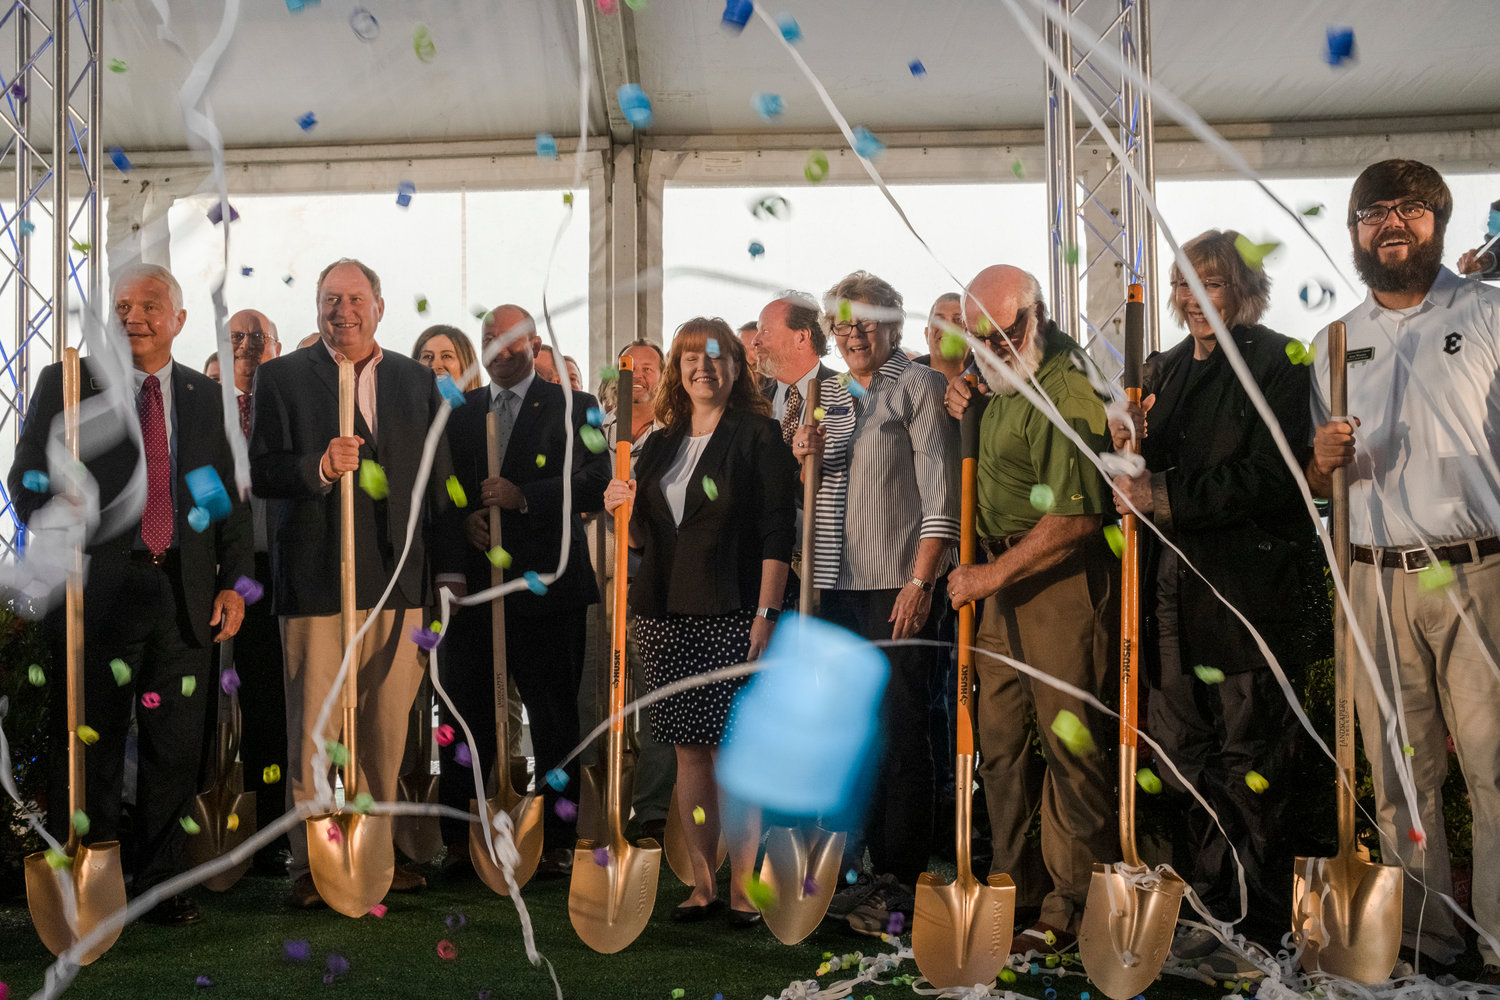 Heavy rain couldn't dampen the spirits of the crowd that gathered under a large tent on Thursday, Aug. 18, to celebrate the groundbreaking of the future Baldwin Preparatory Academy.